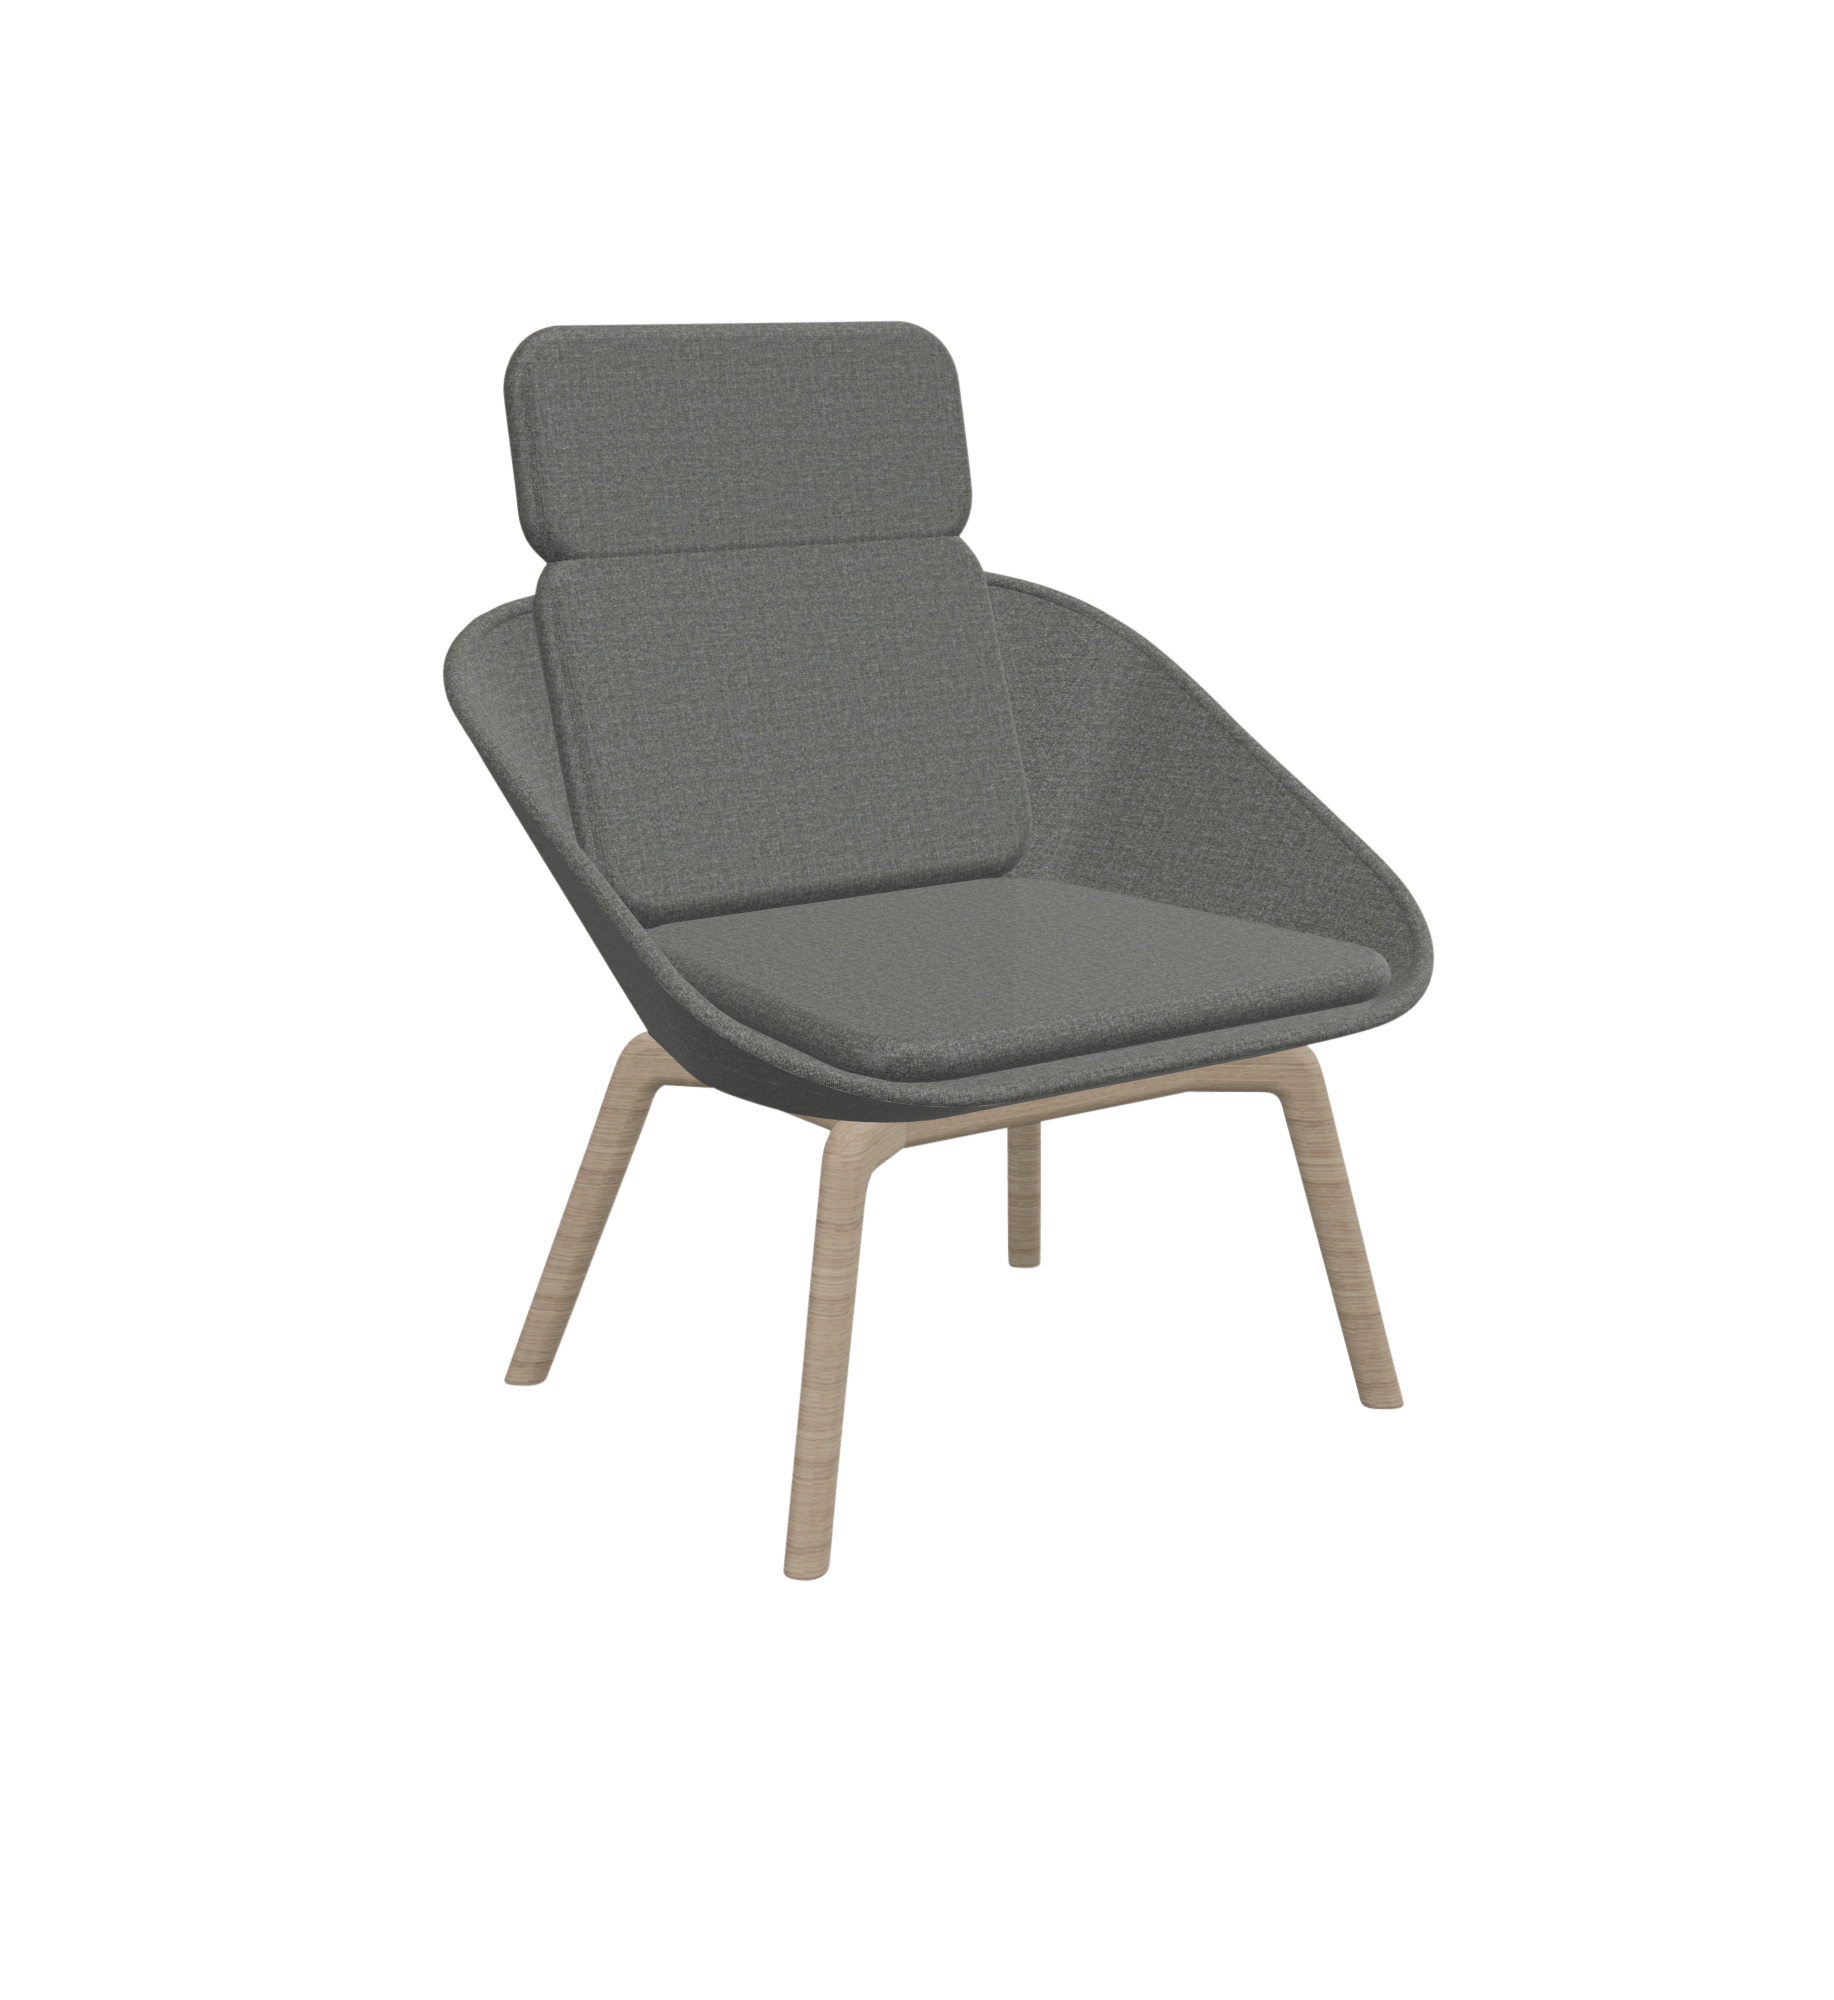 A grey lounge chair with wooden legs.